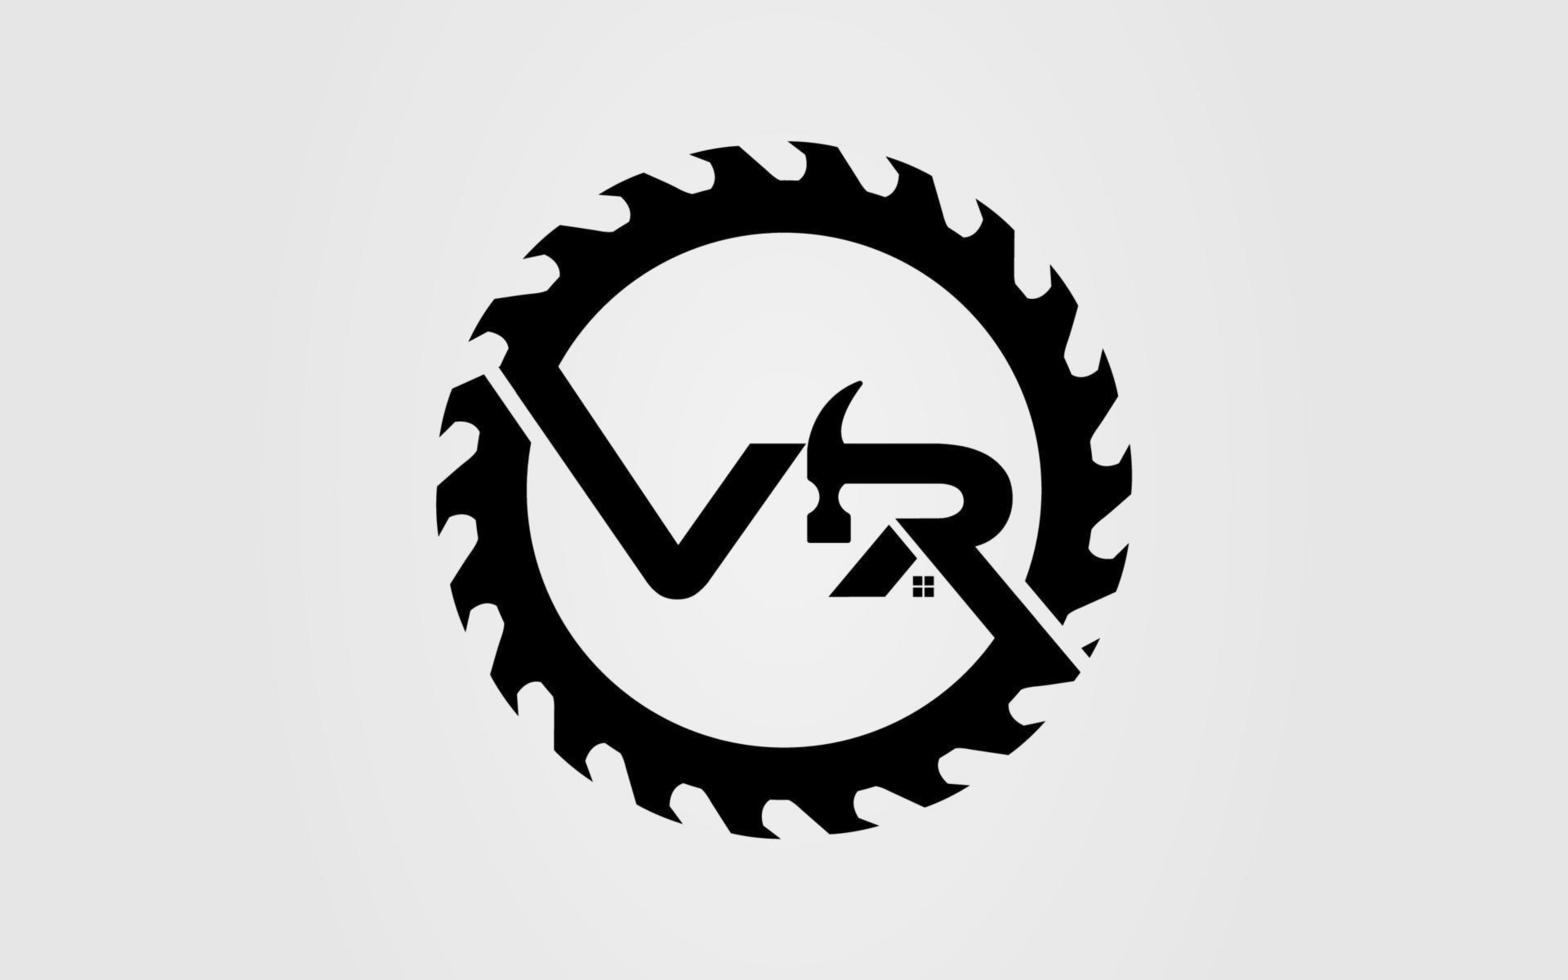 Logo initial v r with circle saw icon template vector